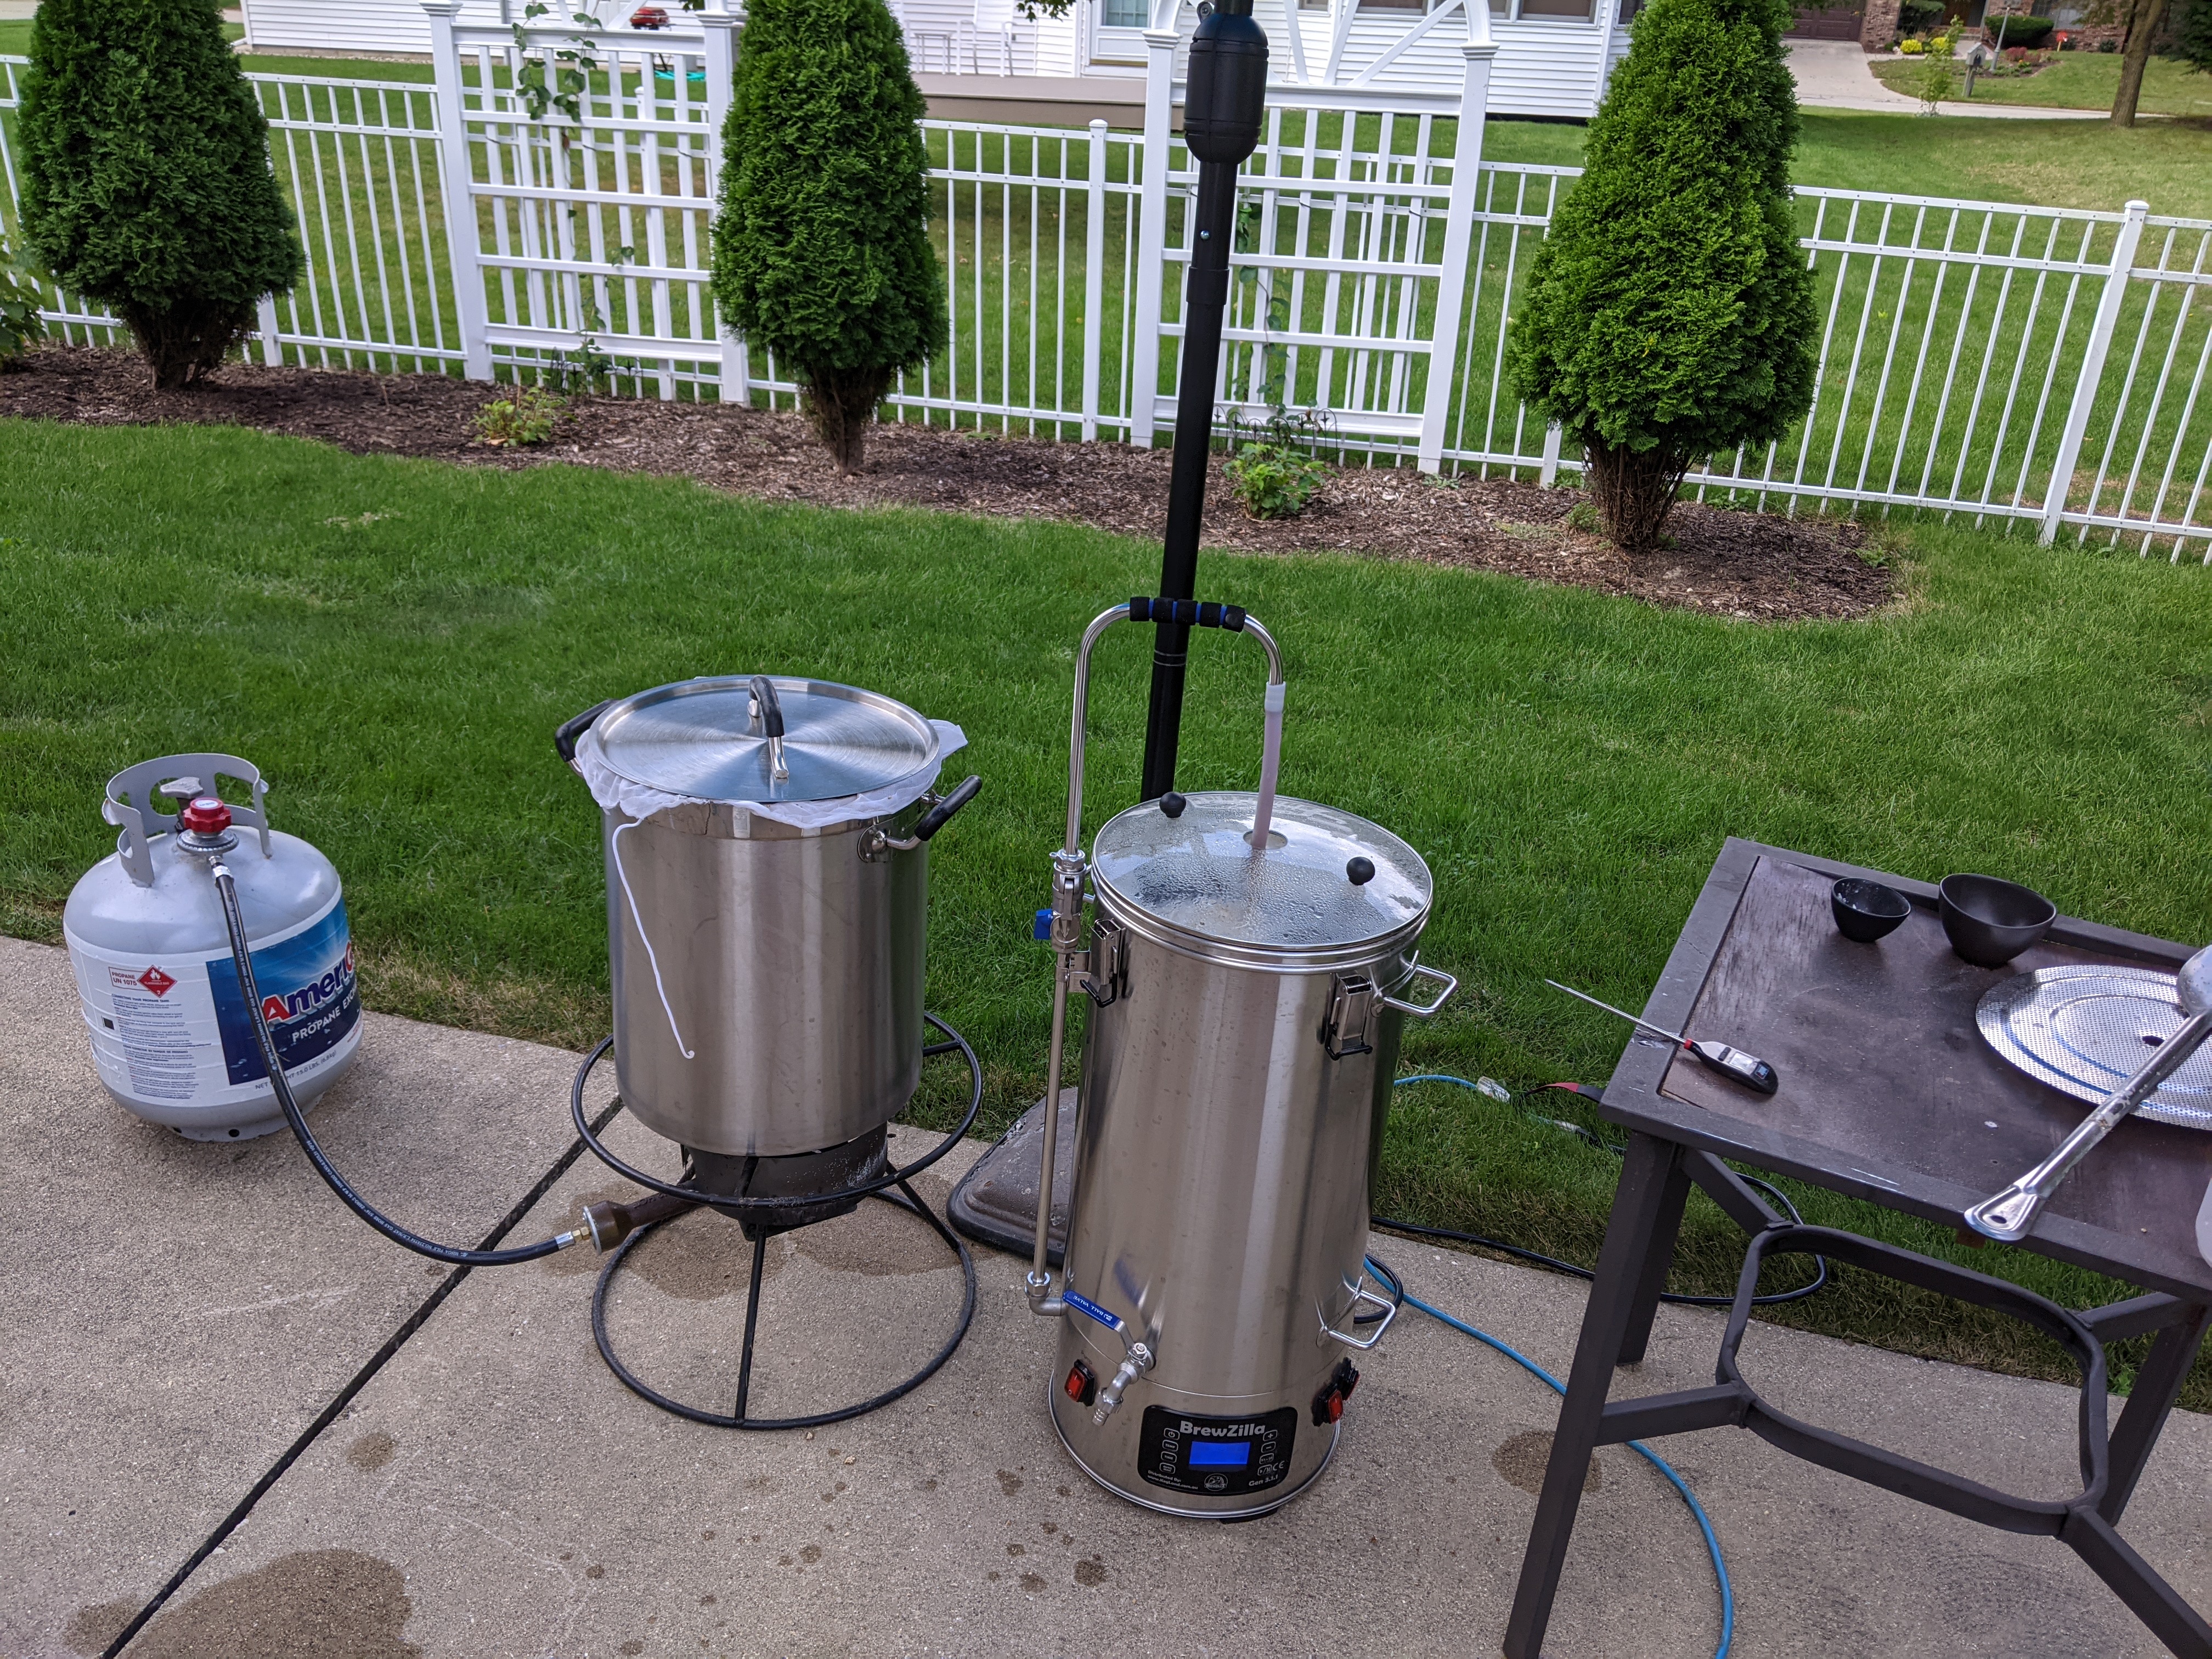 In a nice suburban backyard, there is a beer brewing set up. Photo by BUZZ Homebrew Club.